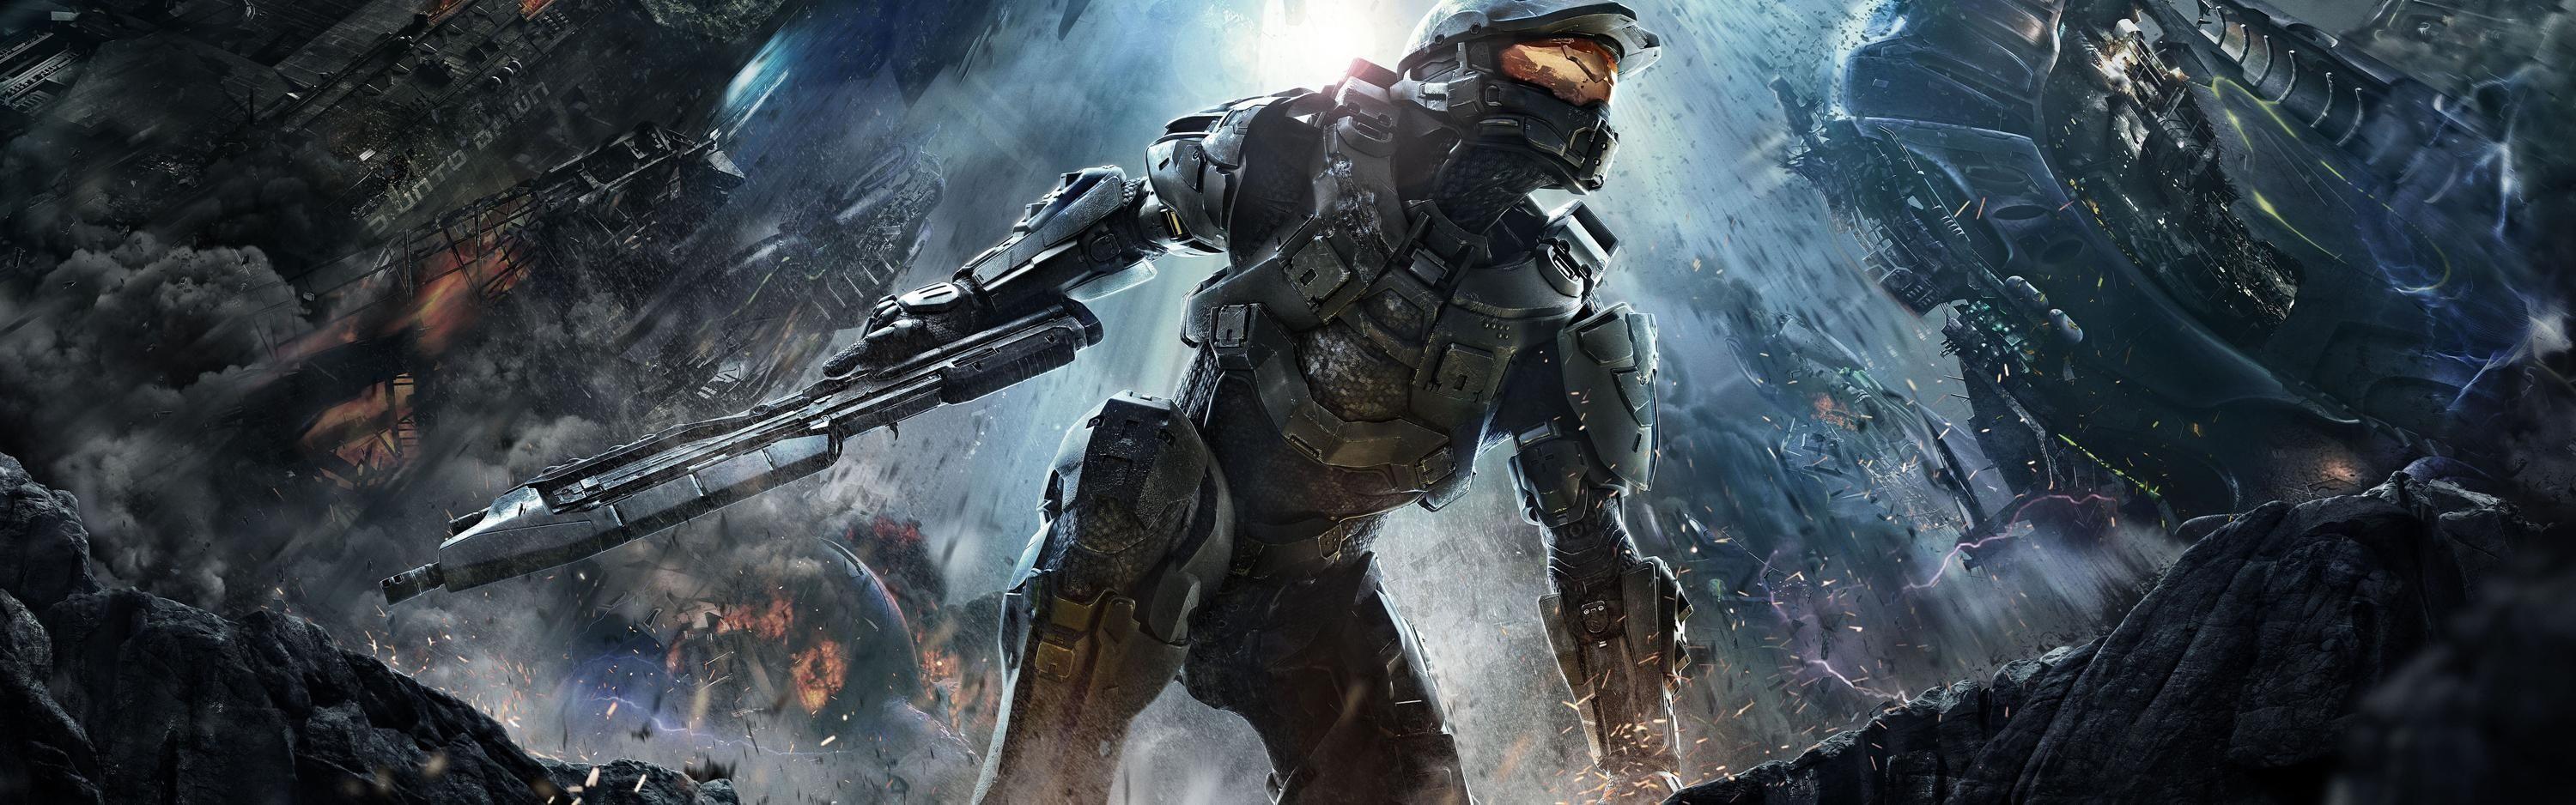 Halo Dual Monitor Wallpapers Top Free Halo Dual Monitor Backgrounds